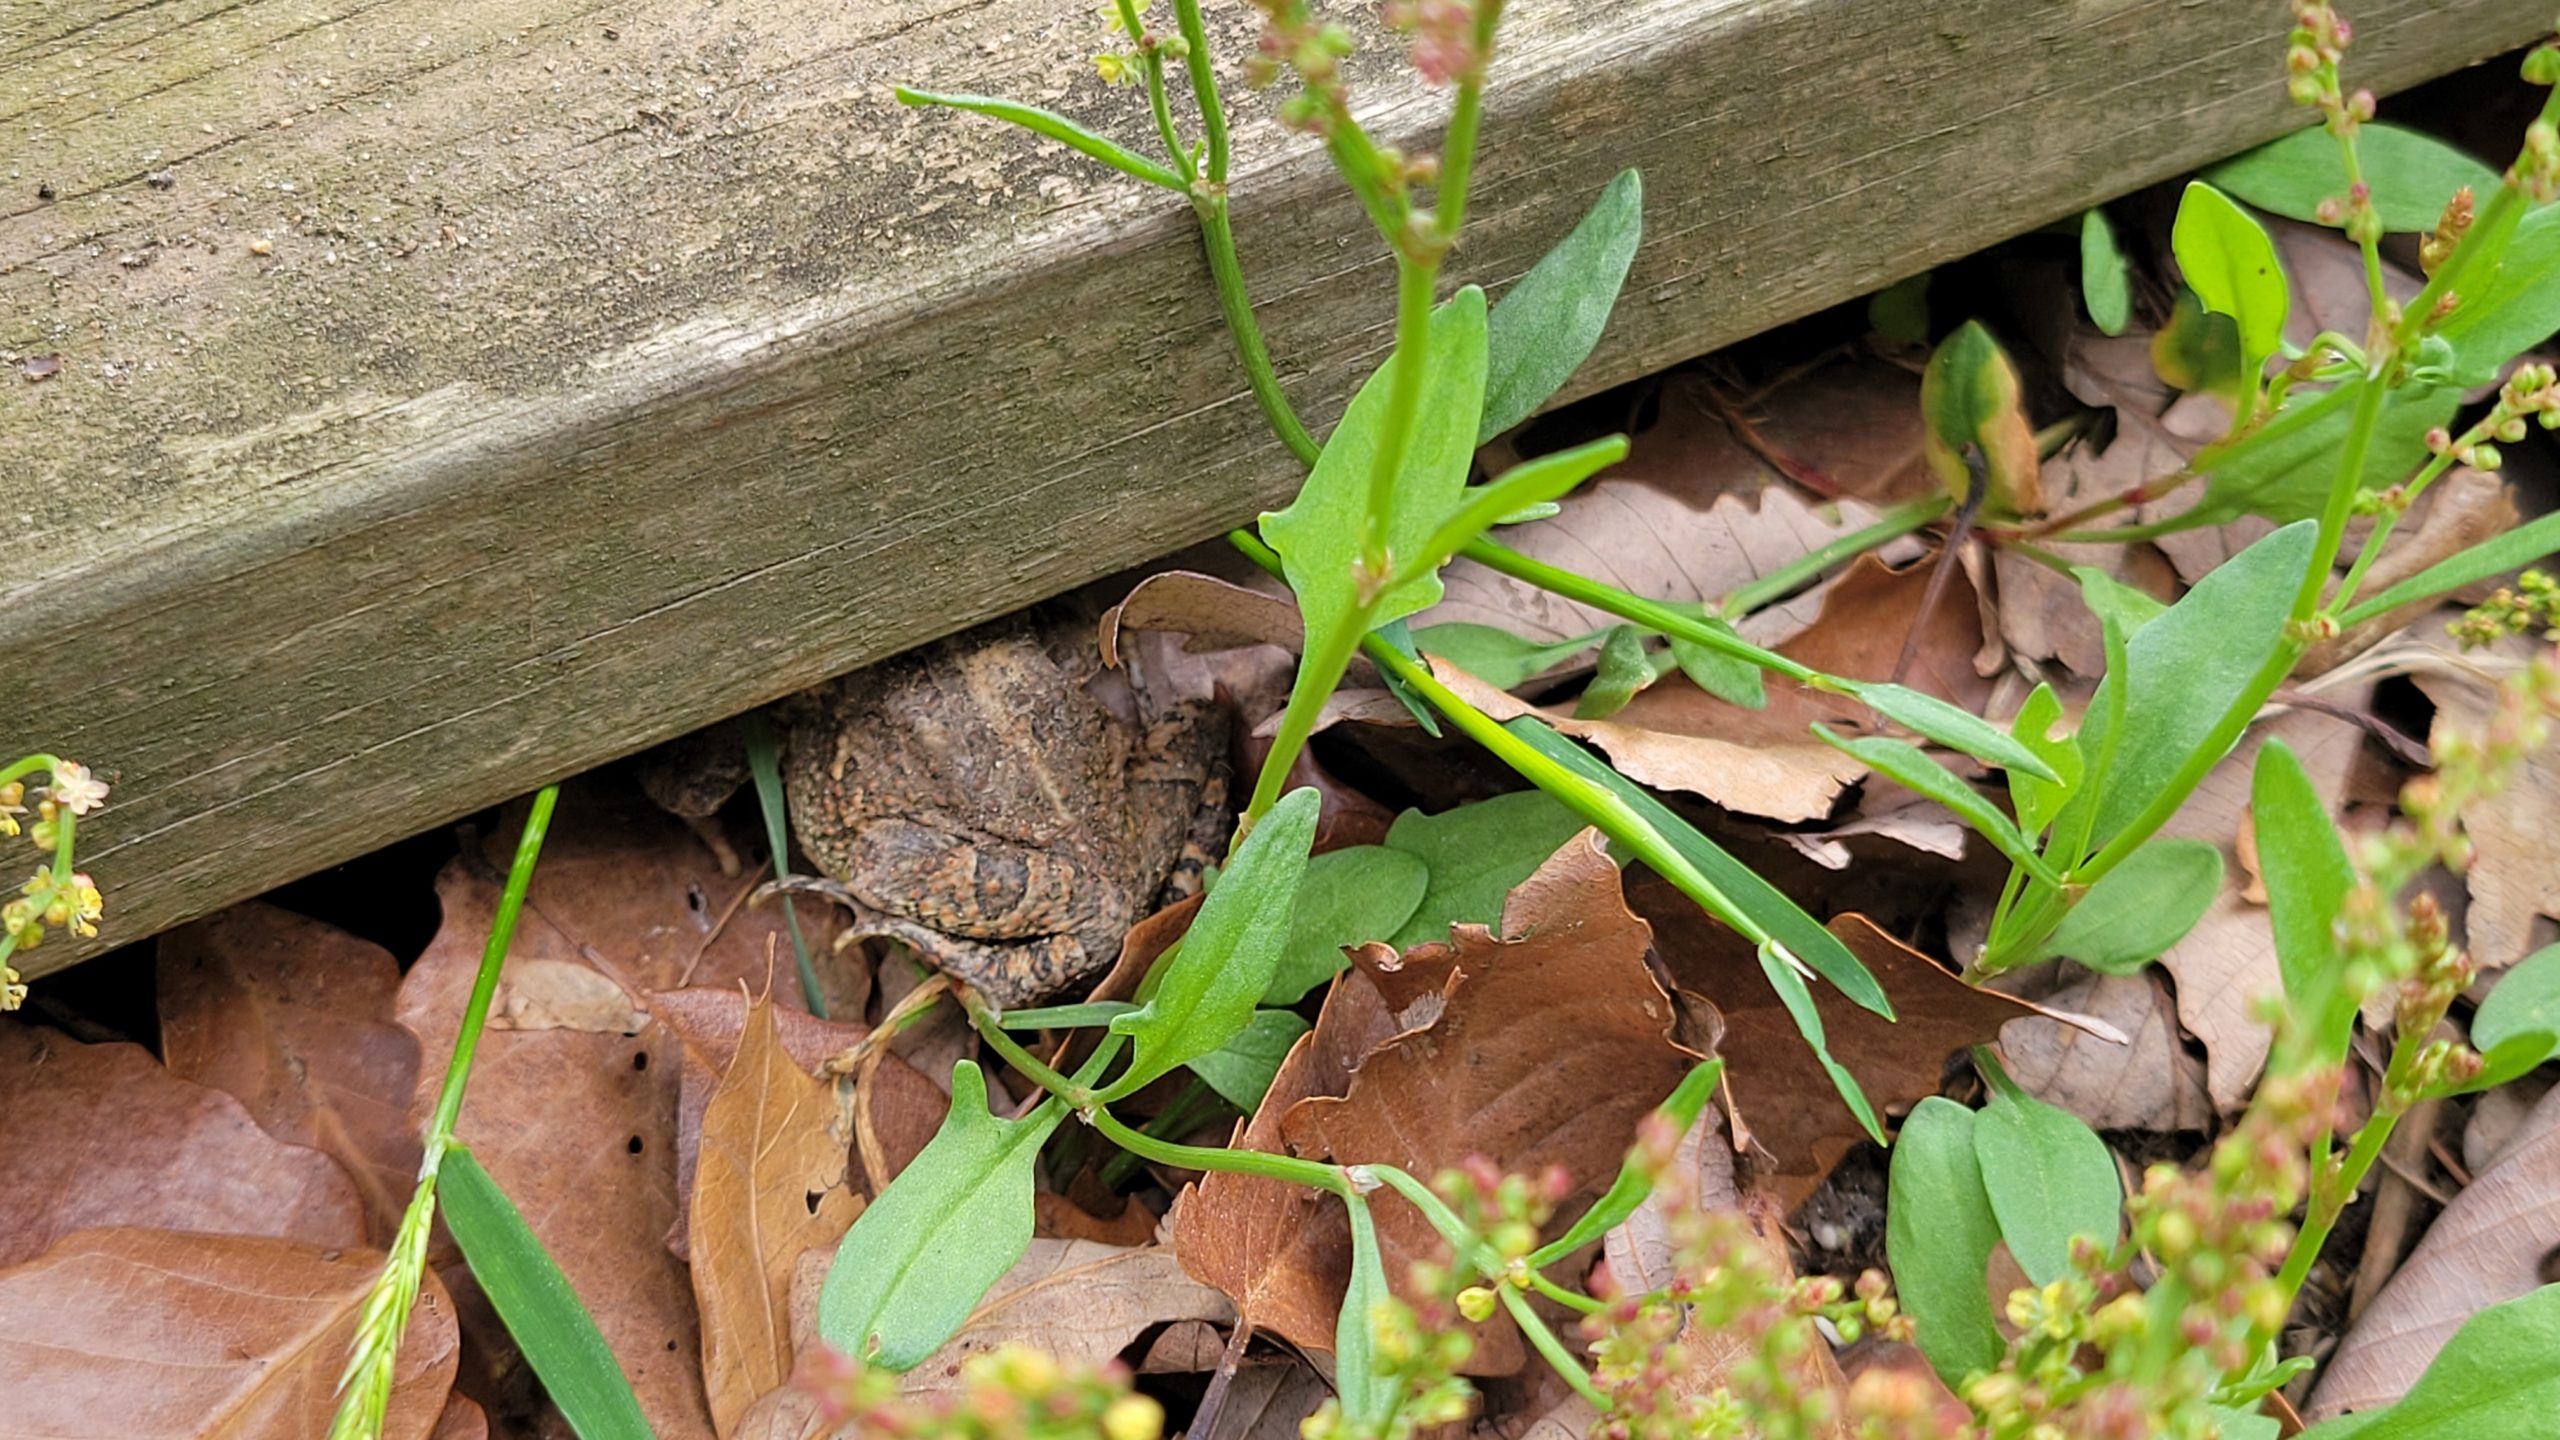 an actual toad, I hope it finds the toad house